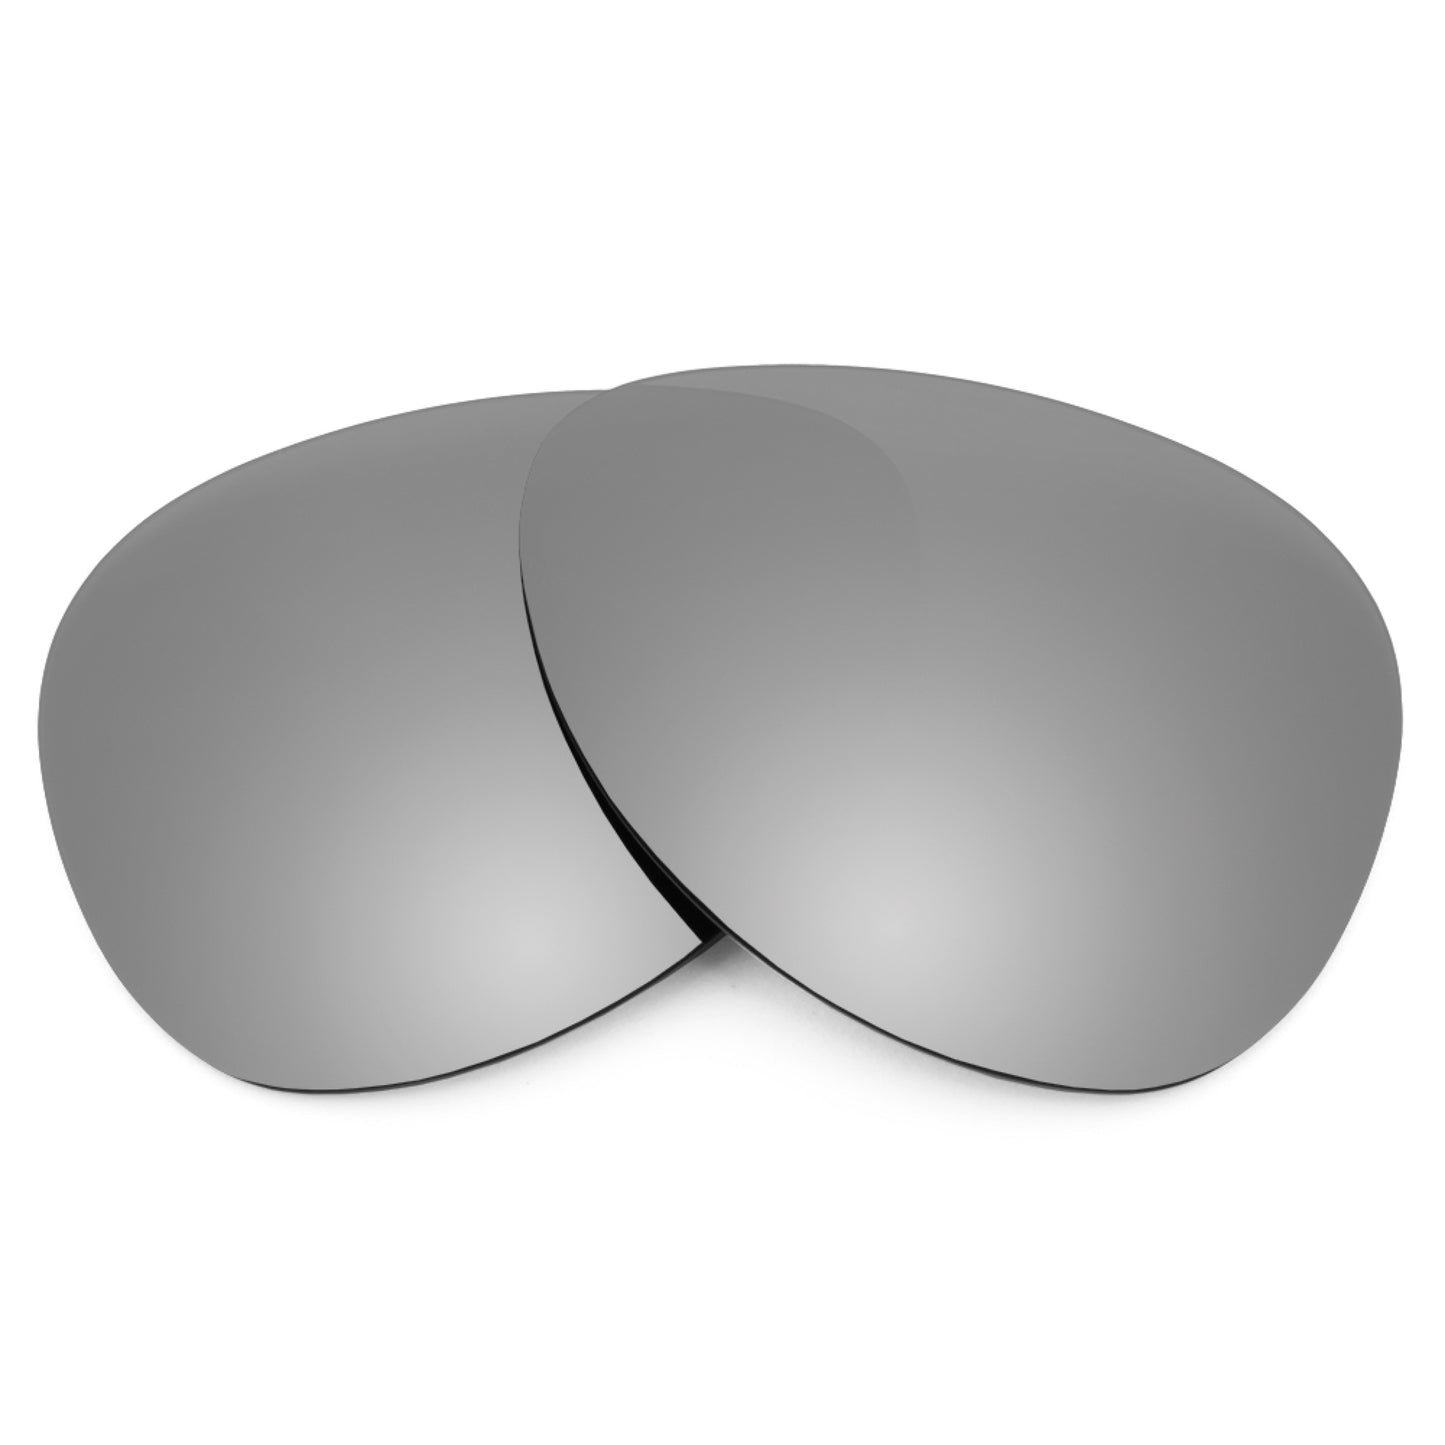 Revant replacement lenses for Ray-Ban Jackie Ohh RB4101 58mm Non-Polarized Titanium